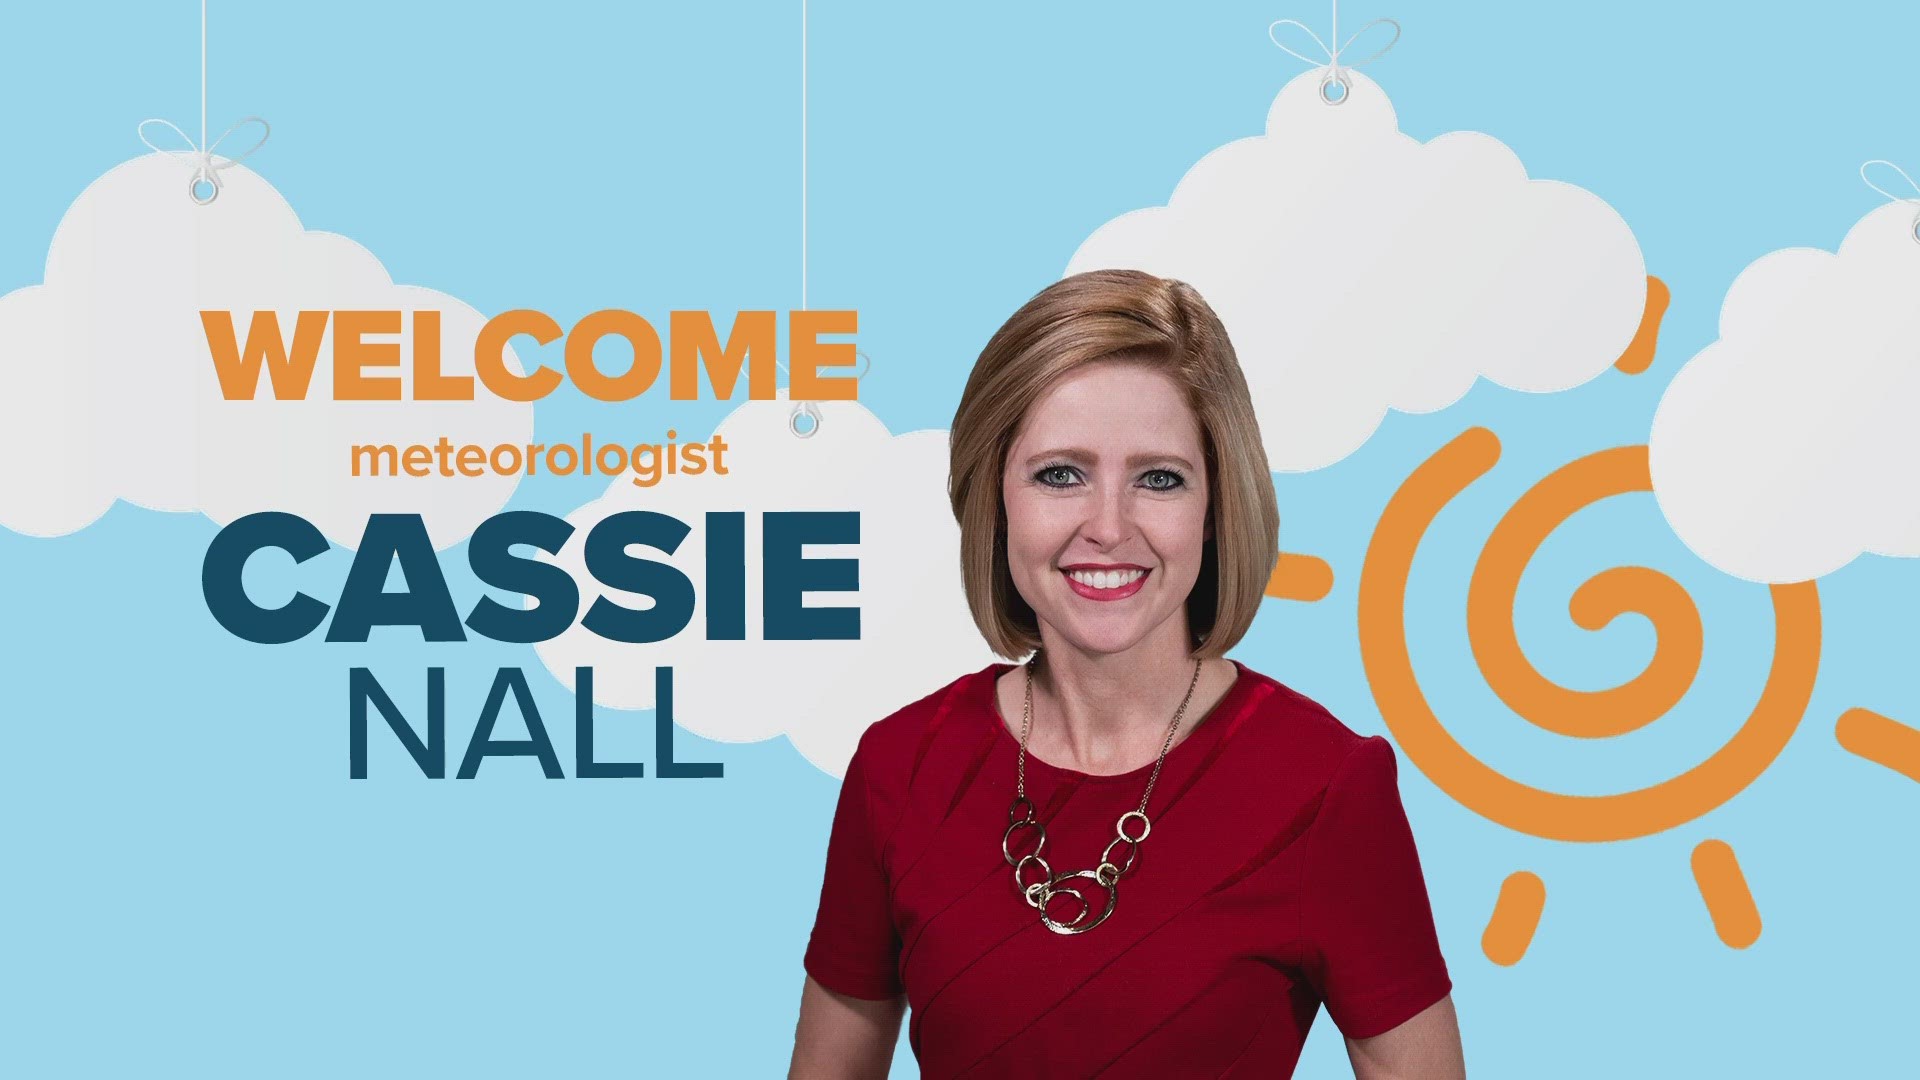 Welcome back, Cassie! We've missed you tons and we're so grateful to have you back in our Channel 10 family!